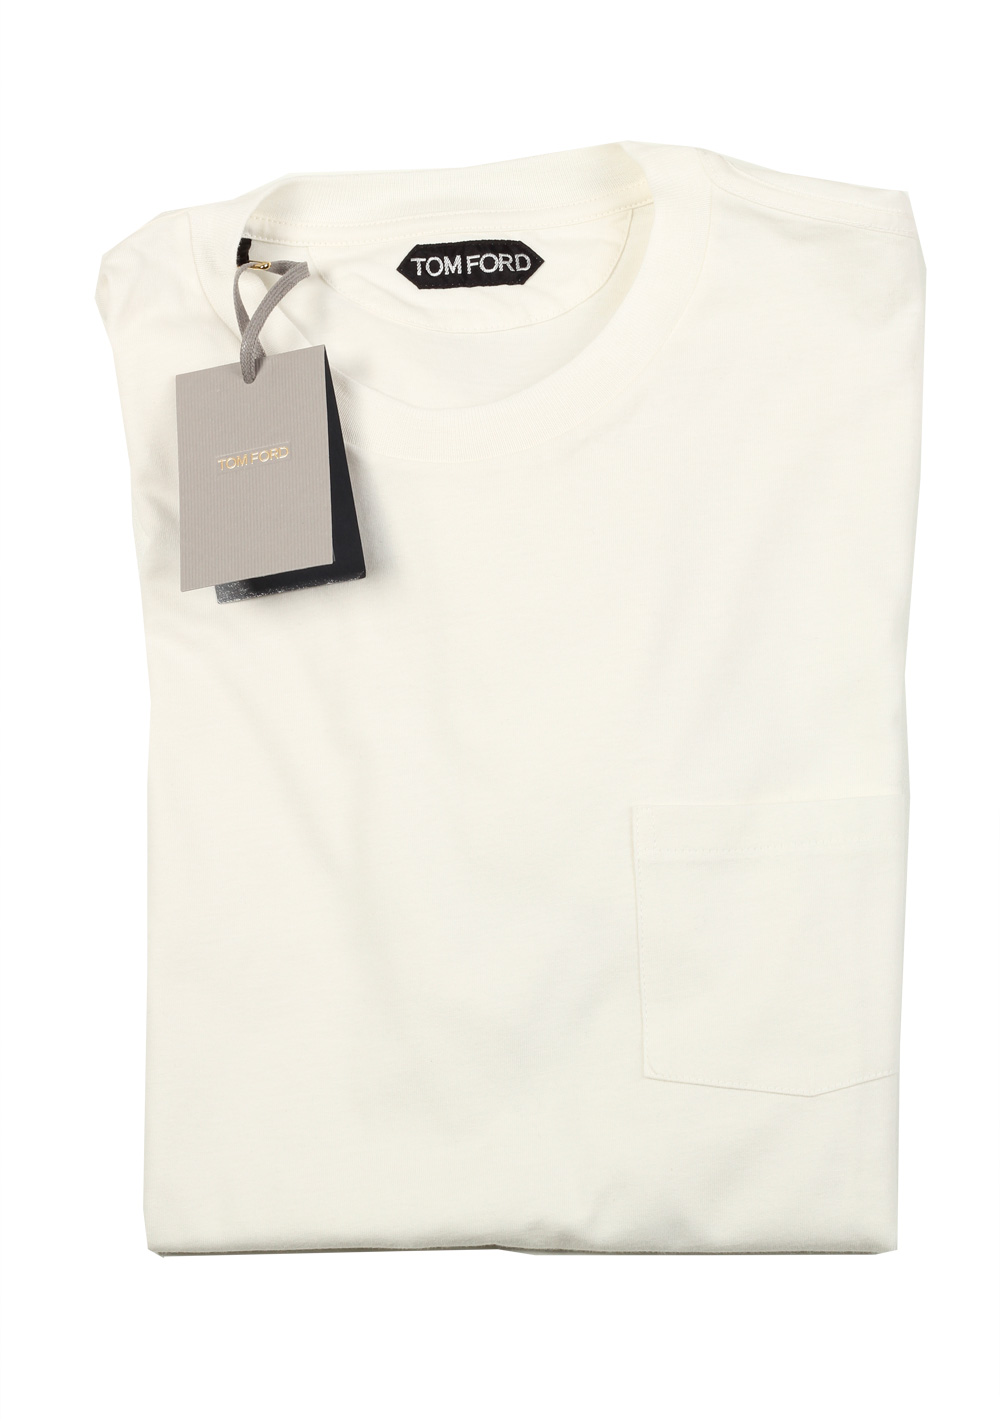 TOM FORD Crew Neck Off White Tee Shirt Size 52 / 42R . | Costume Limité